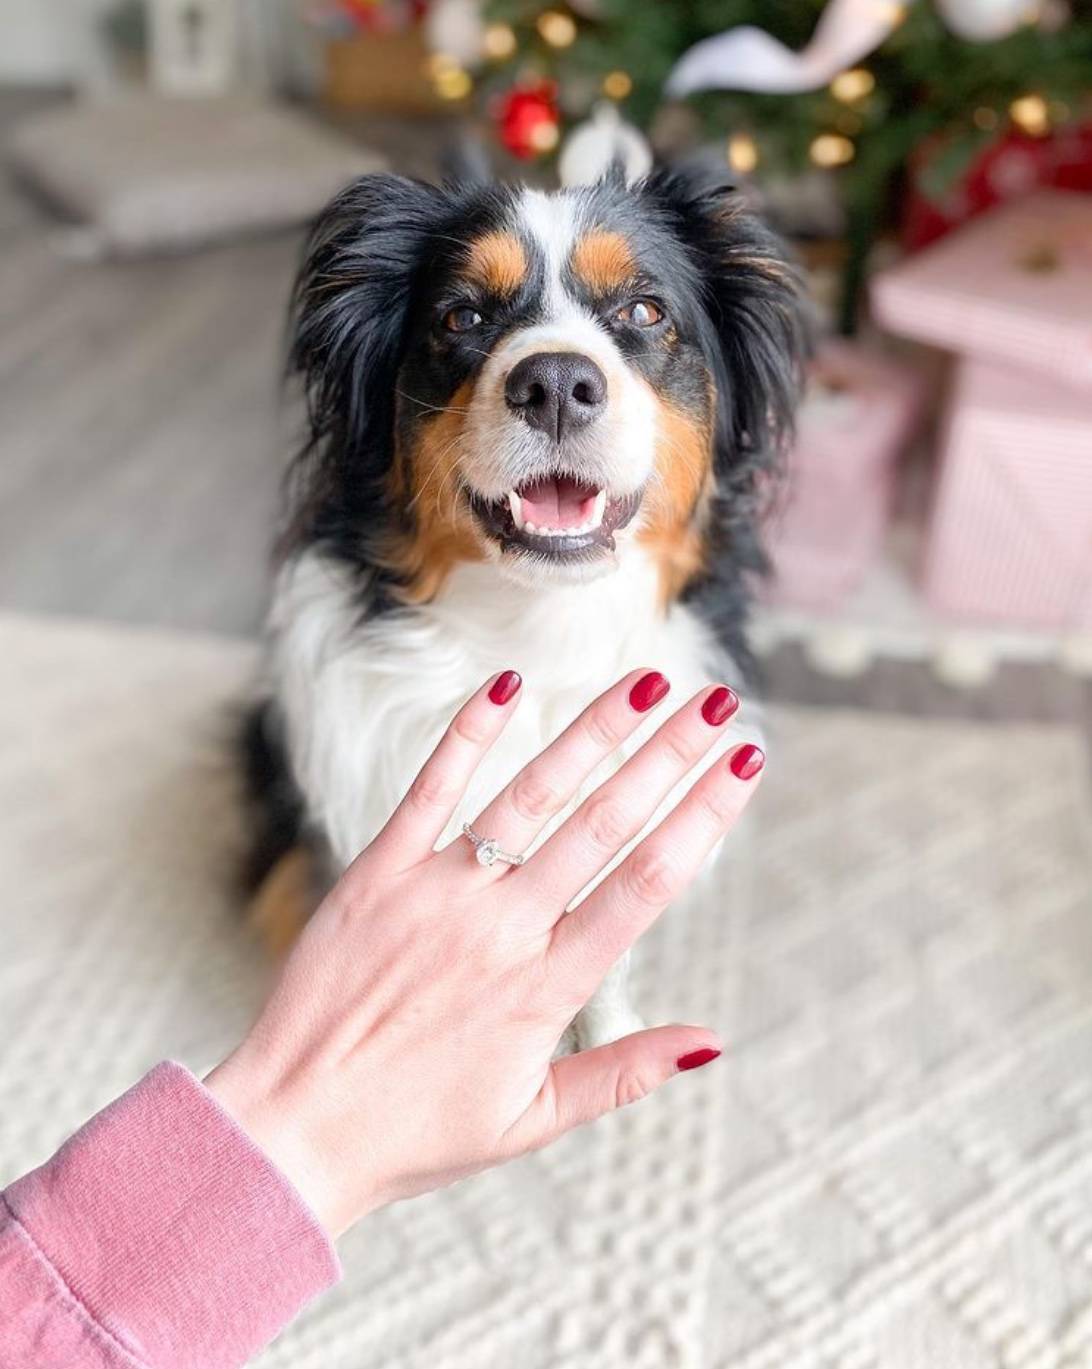 Dog and a Woman with an Engagement Ring